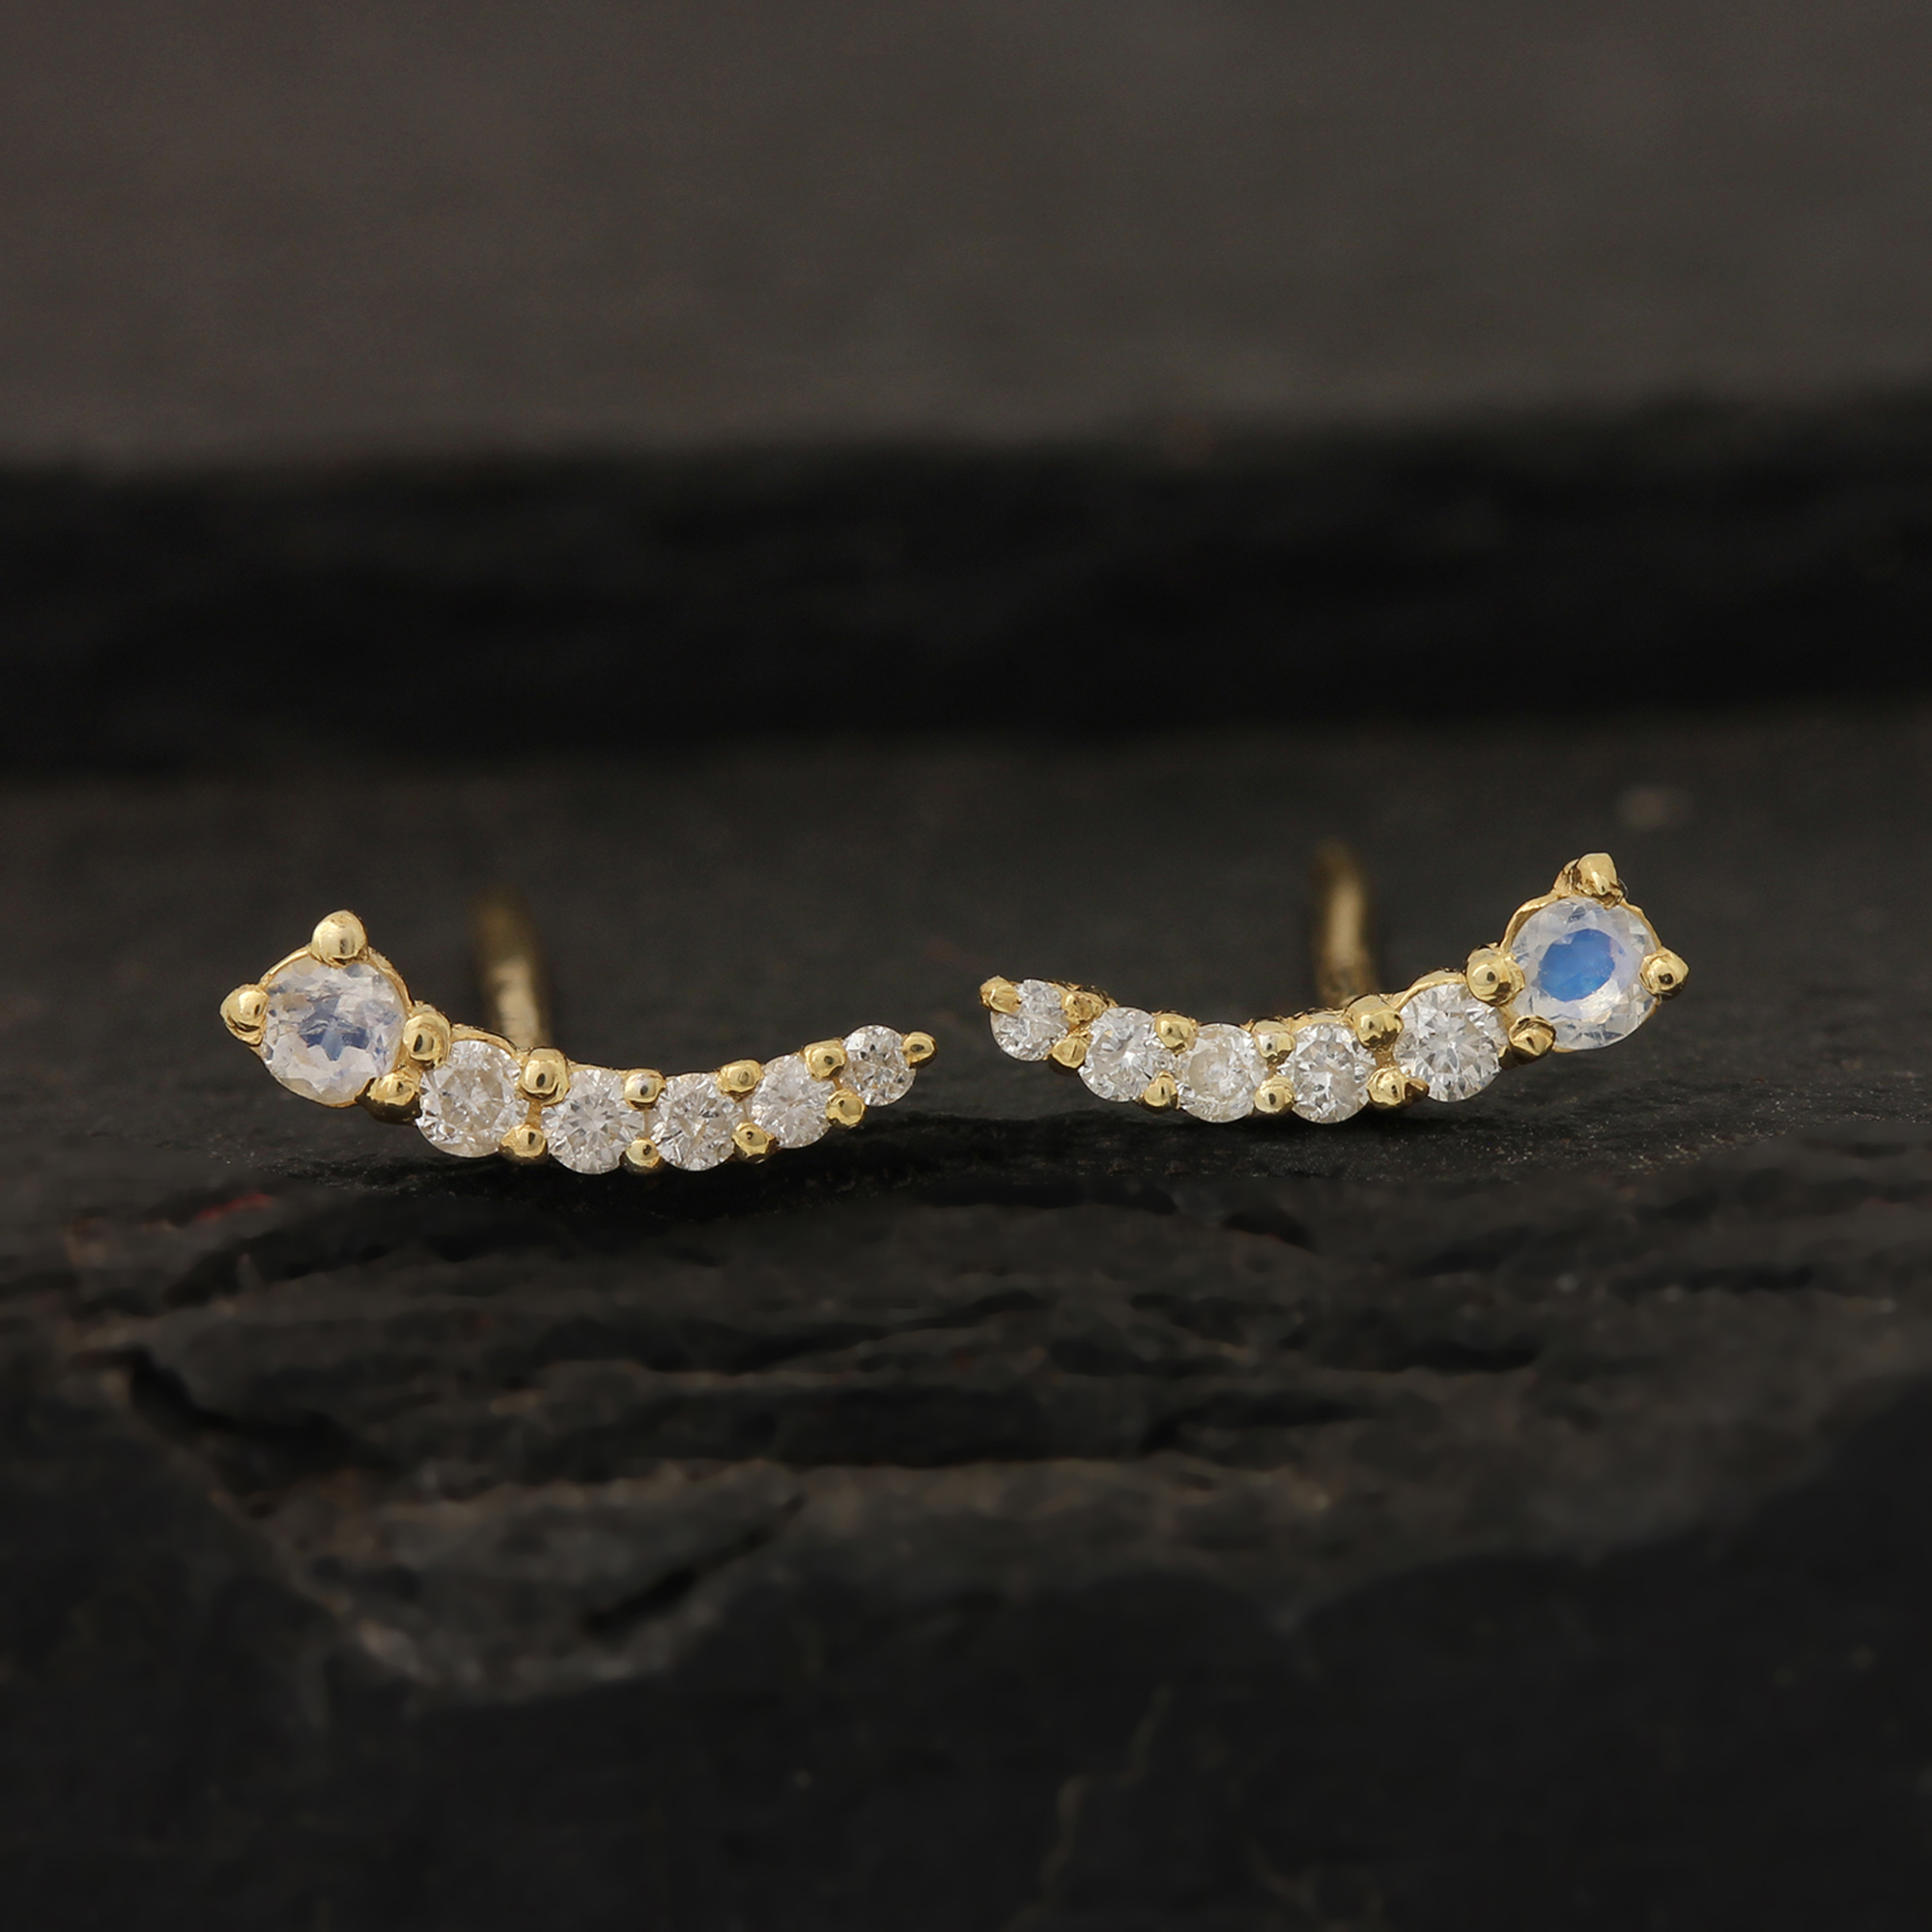 14k Solid Gold Stud Earrings Adorned With Natural Diamond & Rainbow Moonstone